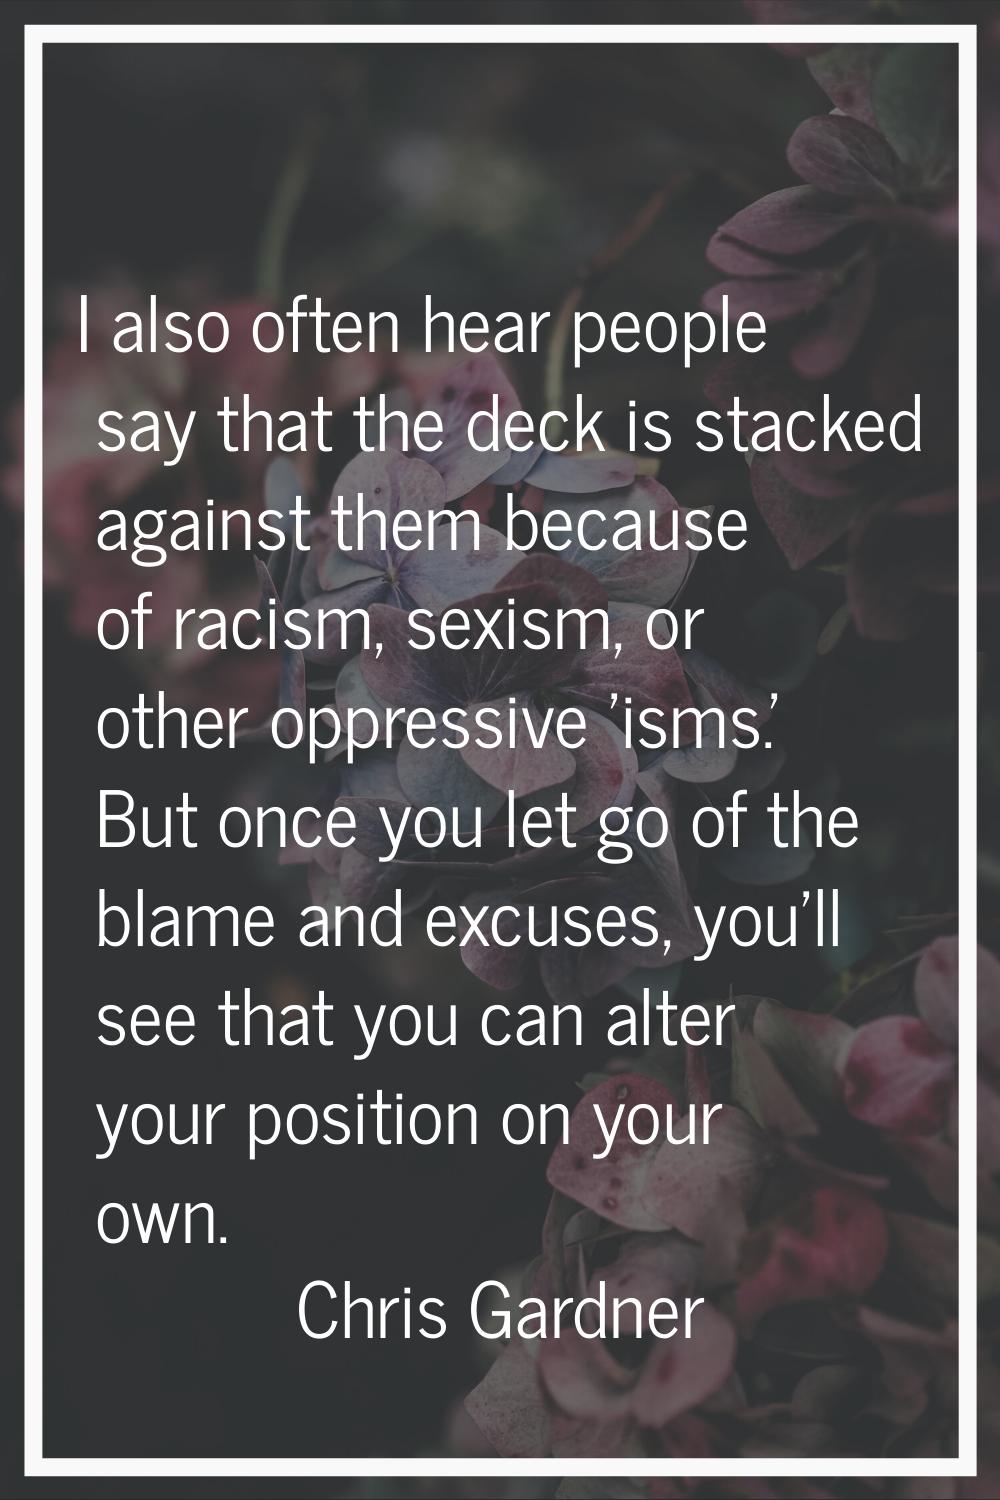 I also often hear people say that the deck is stacked against them because of racism, sexism, or ot